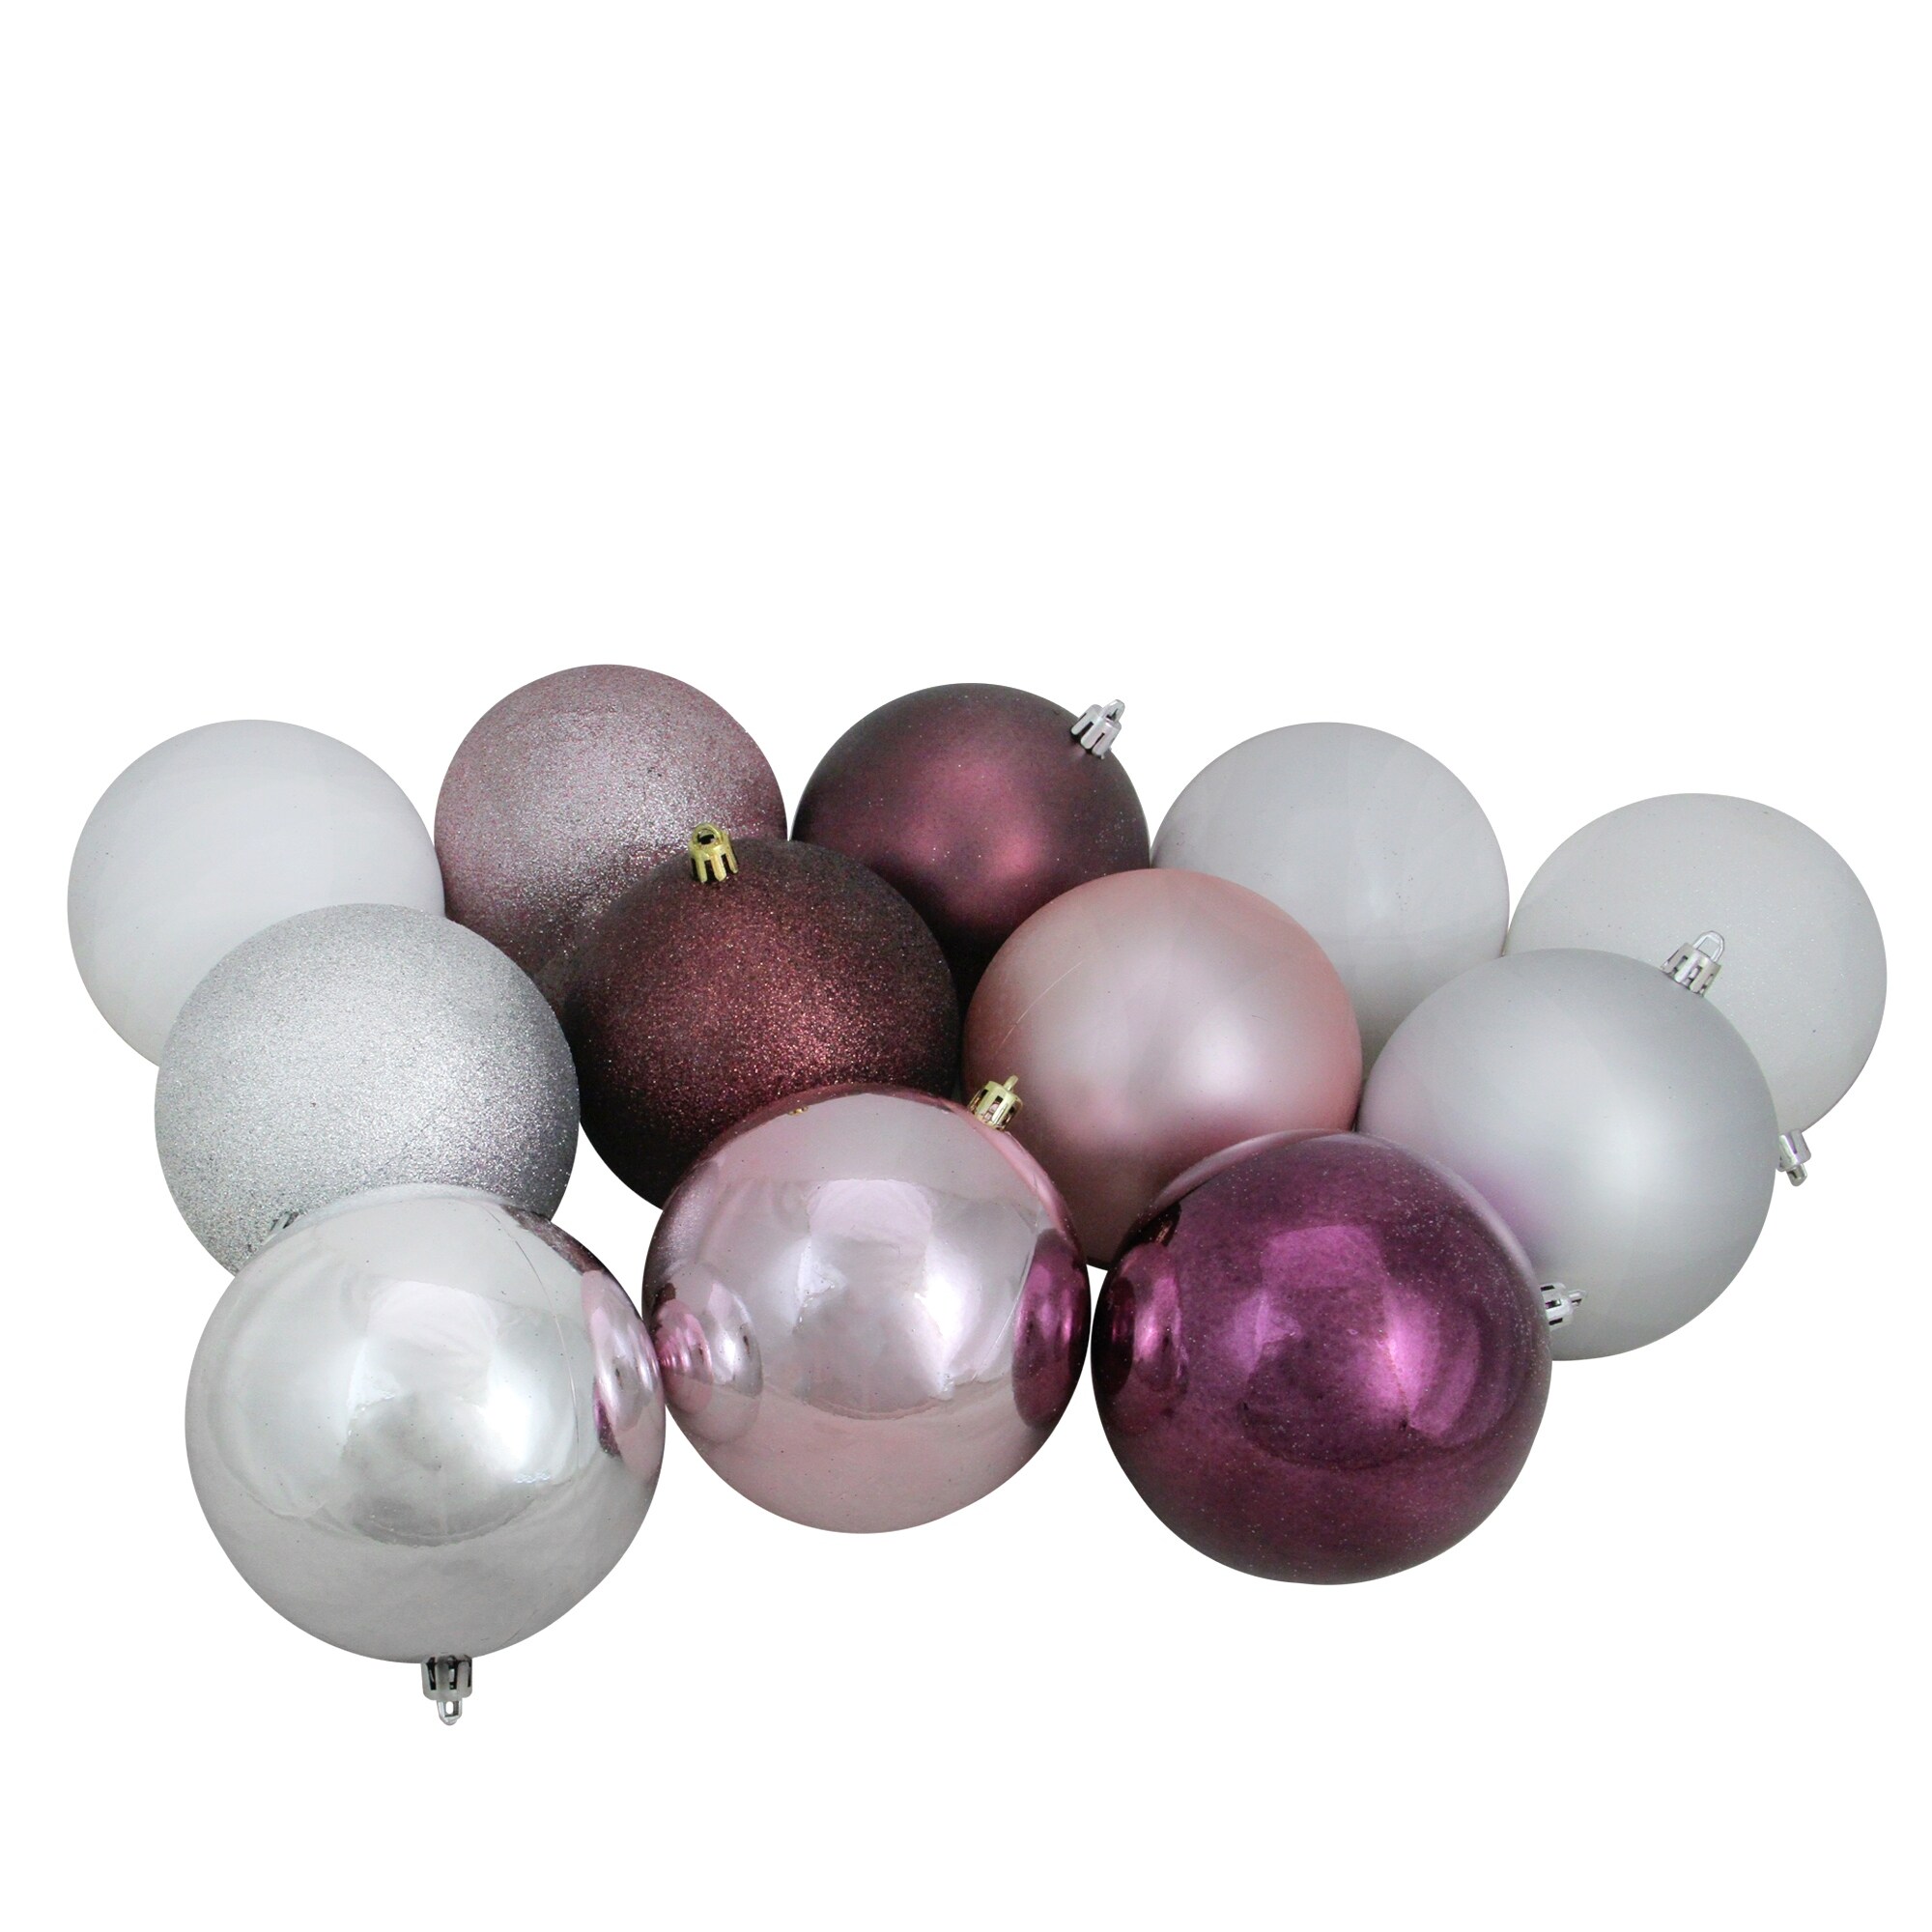 christmas ball ornaments images